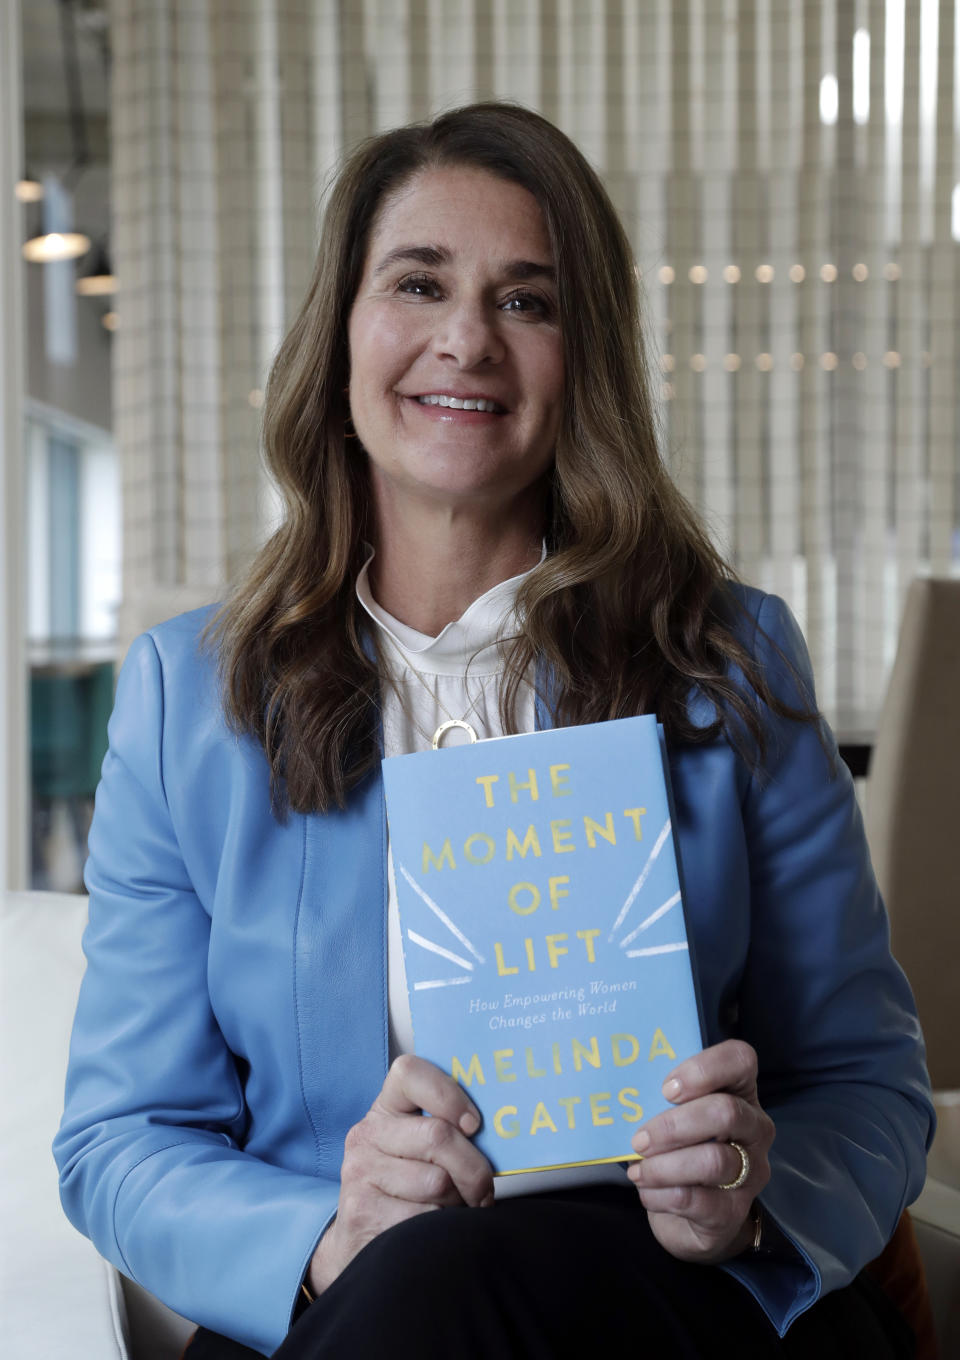 In this photo taken Thursday, April 18, 2019, Melinda Gates poses for a photo with her new book, "The Moment of Lift," in Kirkland, Wash. Her new book is a memoir from the former Microsoft tech business executive, outspoken feminist and public supporter of the MeToo movement. The Associated Press reviewed an advanced copy of the book ahead of its release Tuesday. (AP Photo/Elaine Thompson)